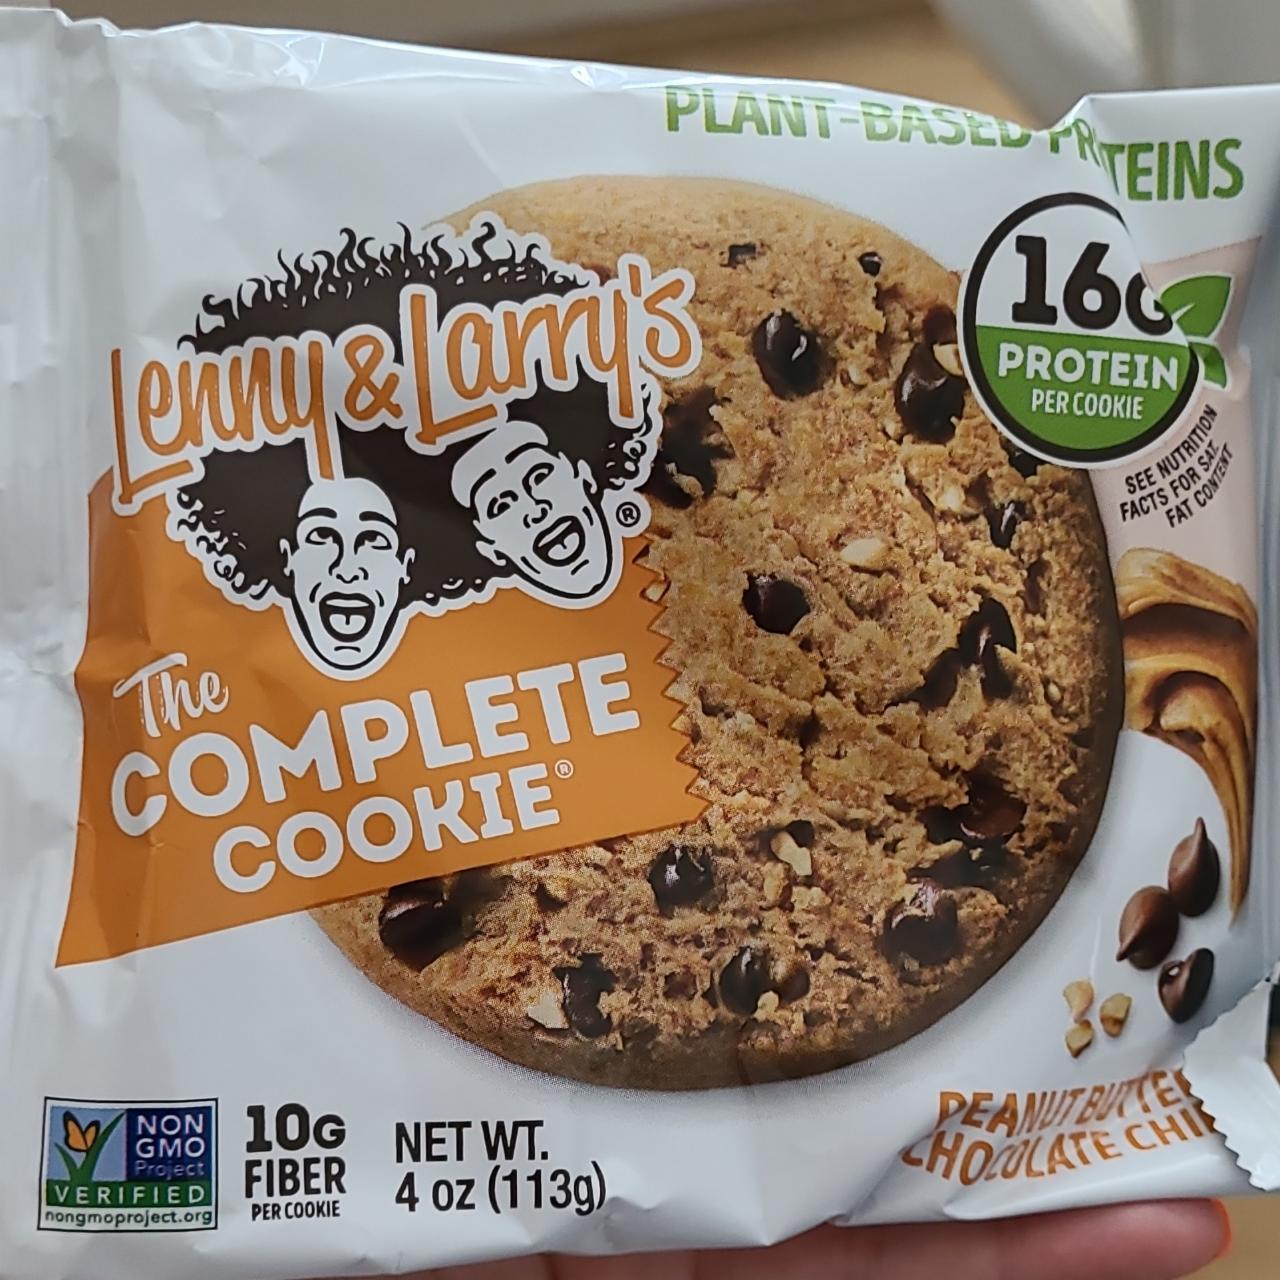 Fotografie - The complete cookie Peanut butter Chocolate chip 16g protein Lenny&Larry's